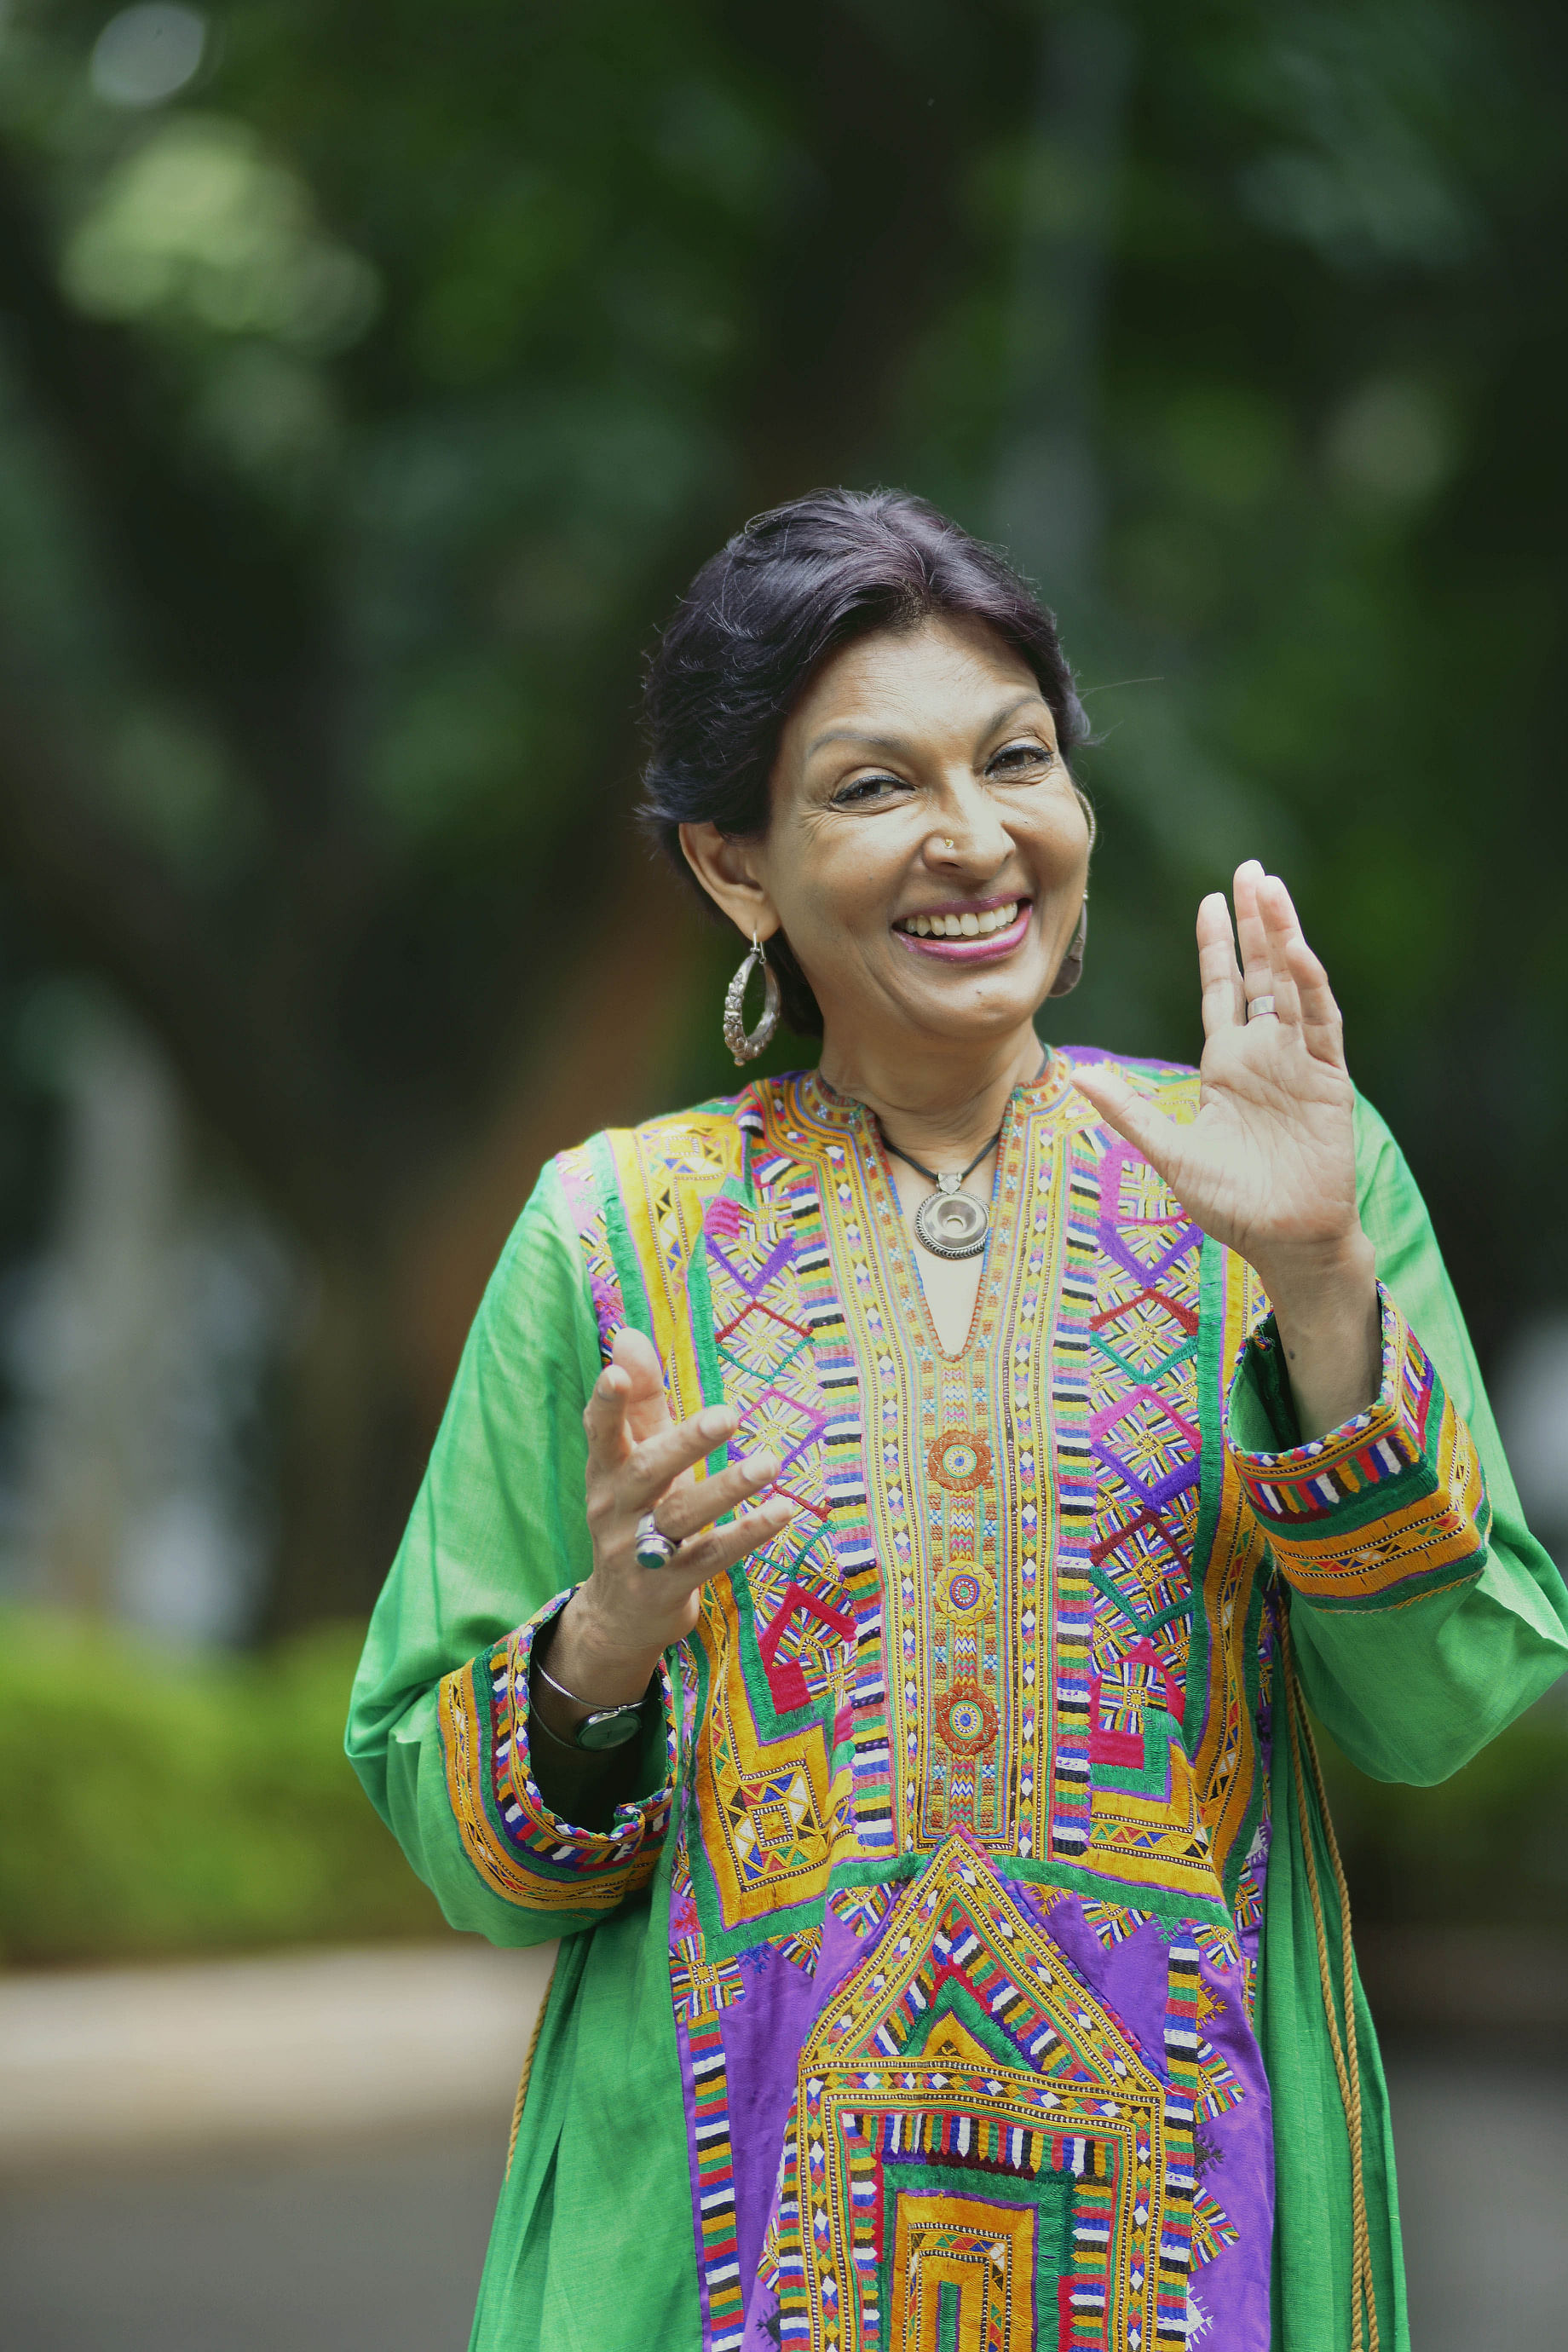 Mallika Sarabhai was in the city for a performance.